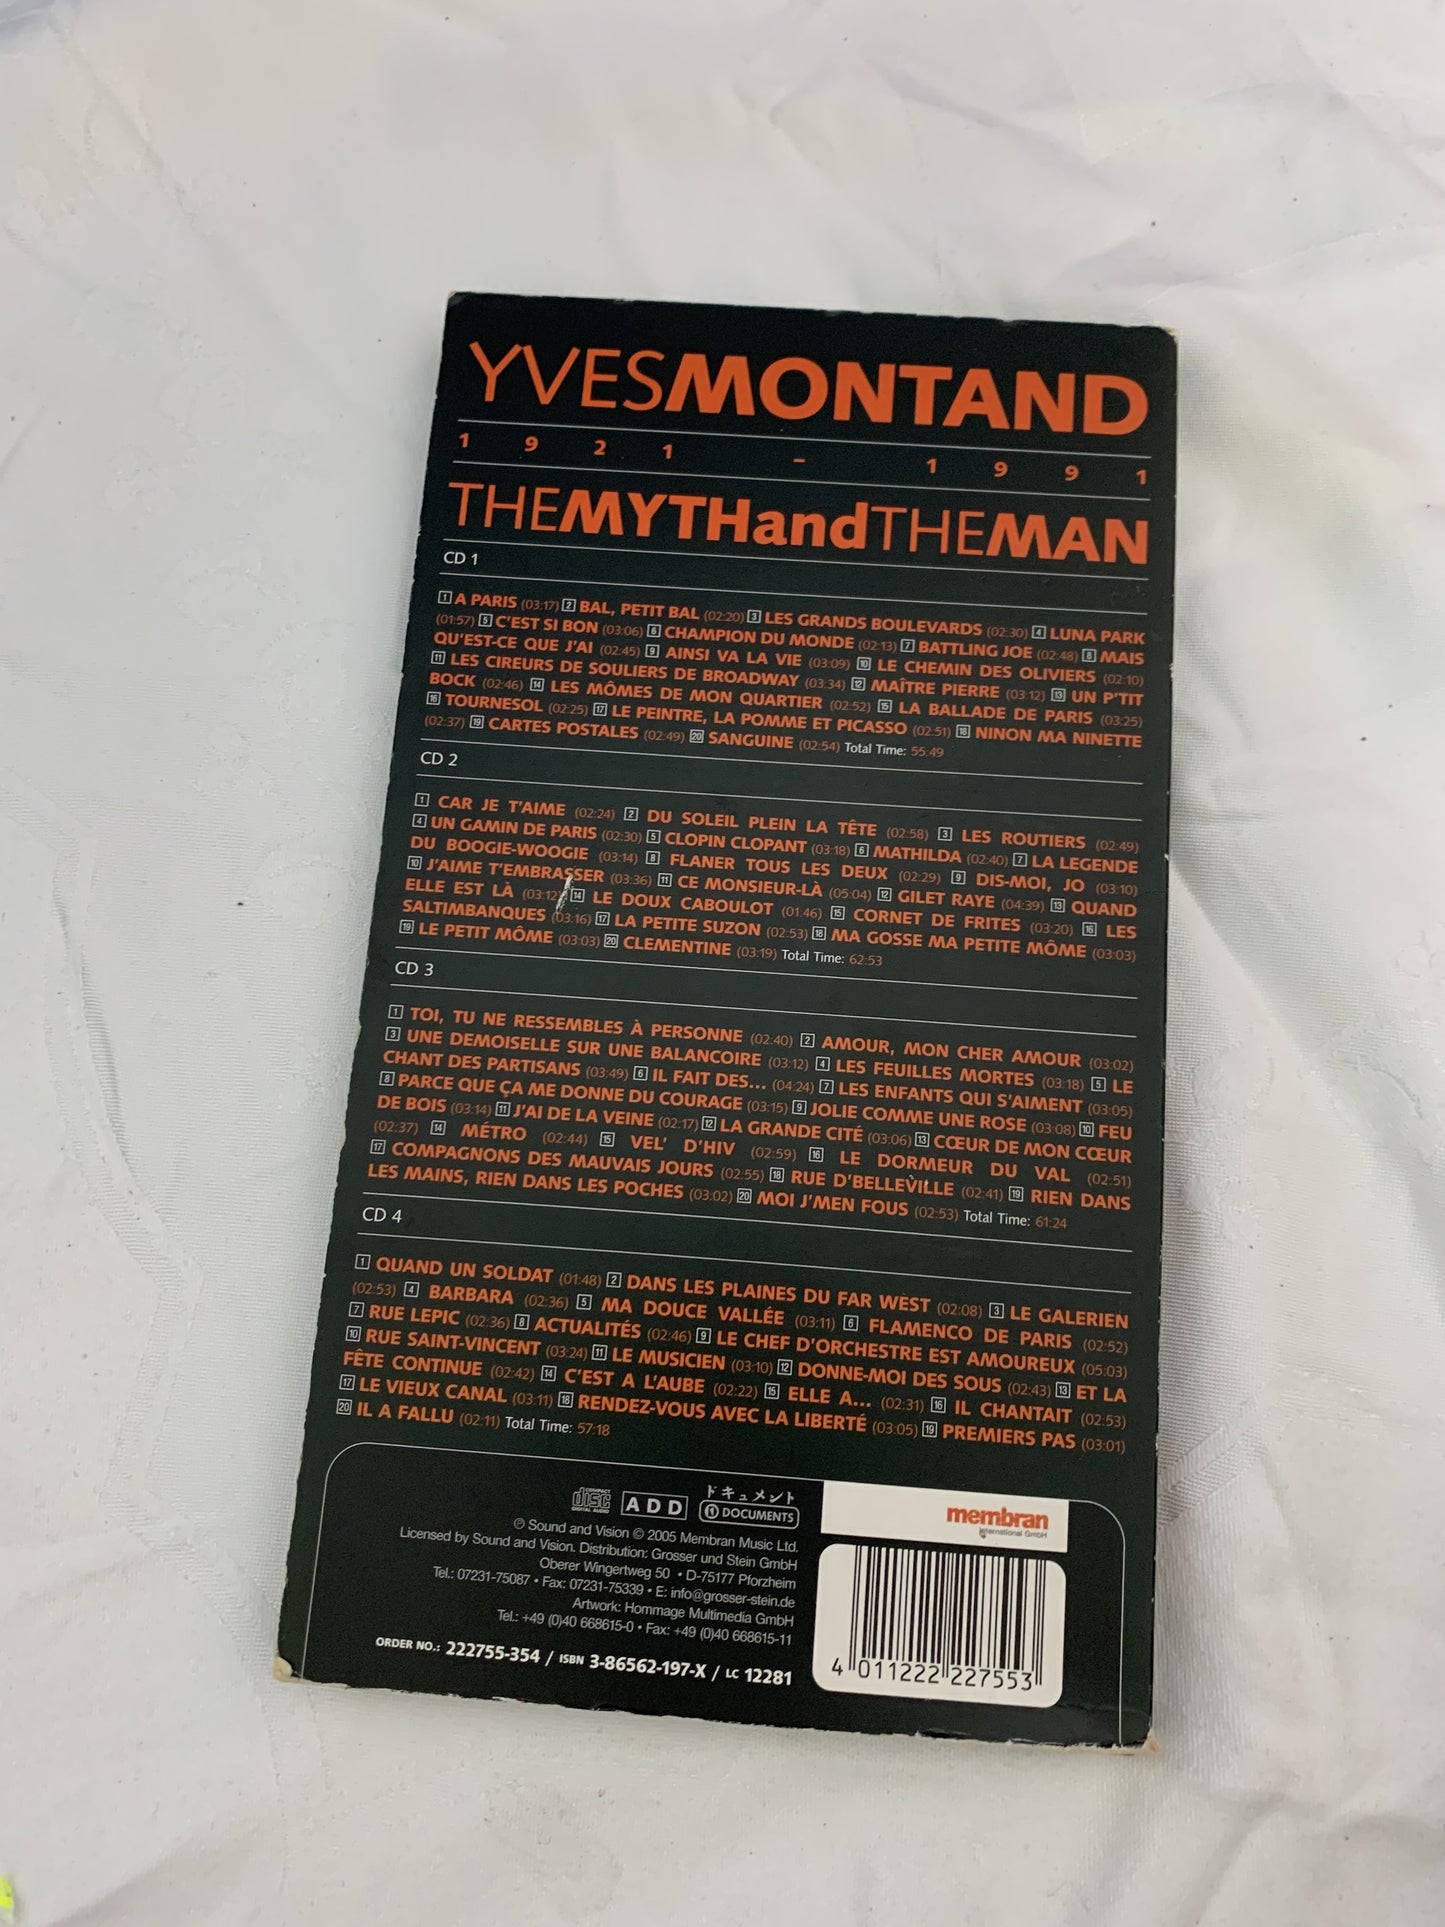 Yves Montand, The Myth and the Man, 1921-1991